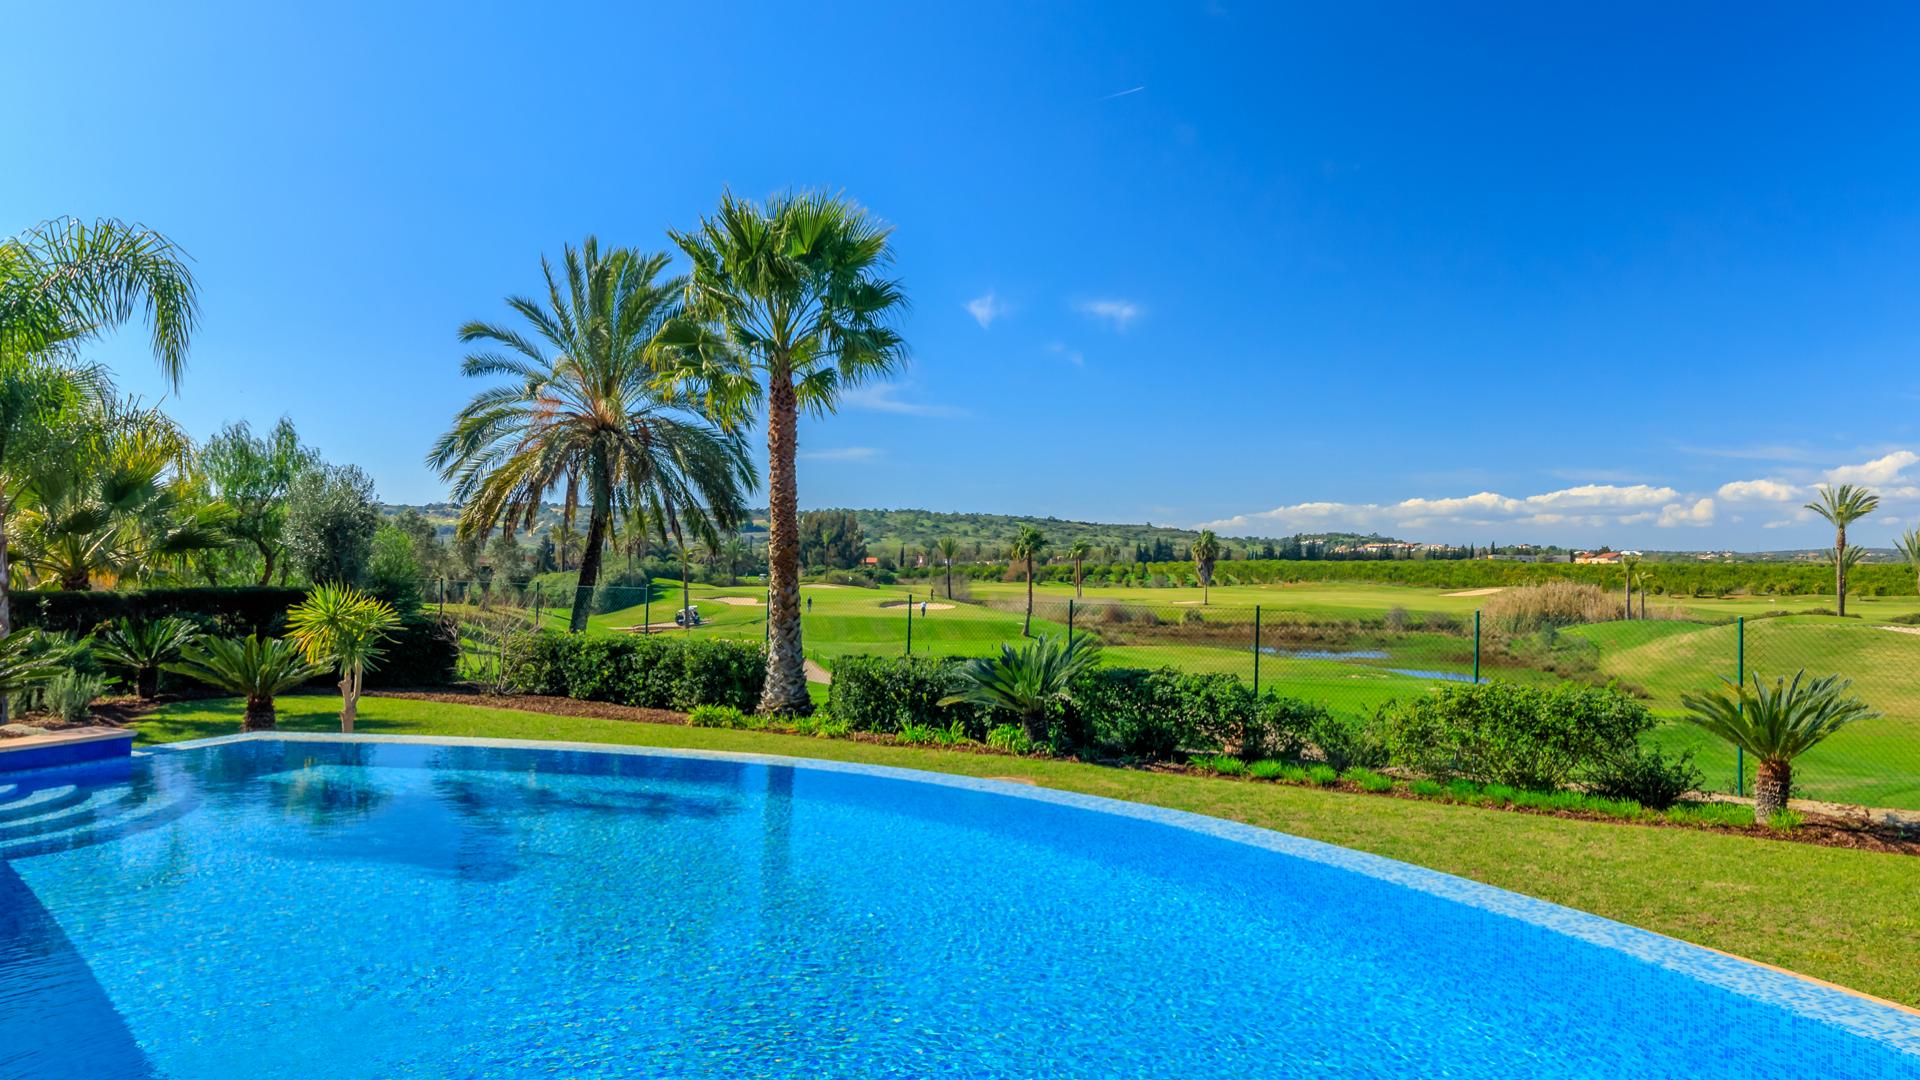 Property for sale in the Algarve: the safest choice!